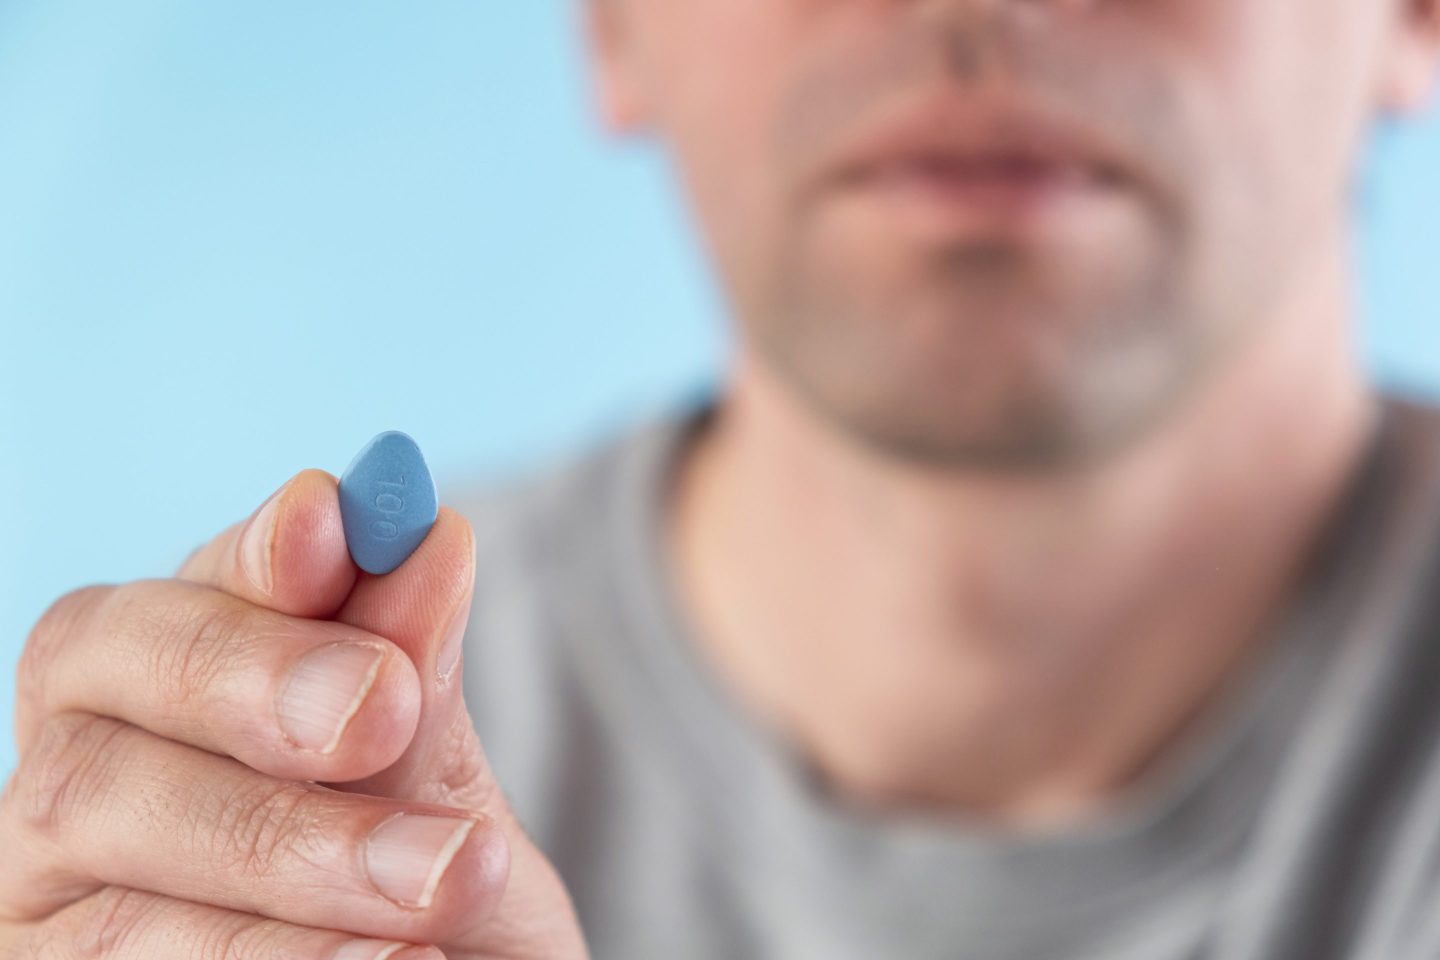 Man hold blue pill viagra in fingers on blue background. Medicine concept of men health, medication for potency, erection, treatment of erectile dysfunction Macro shot